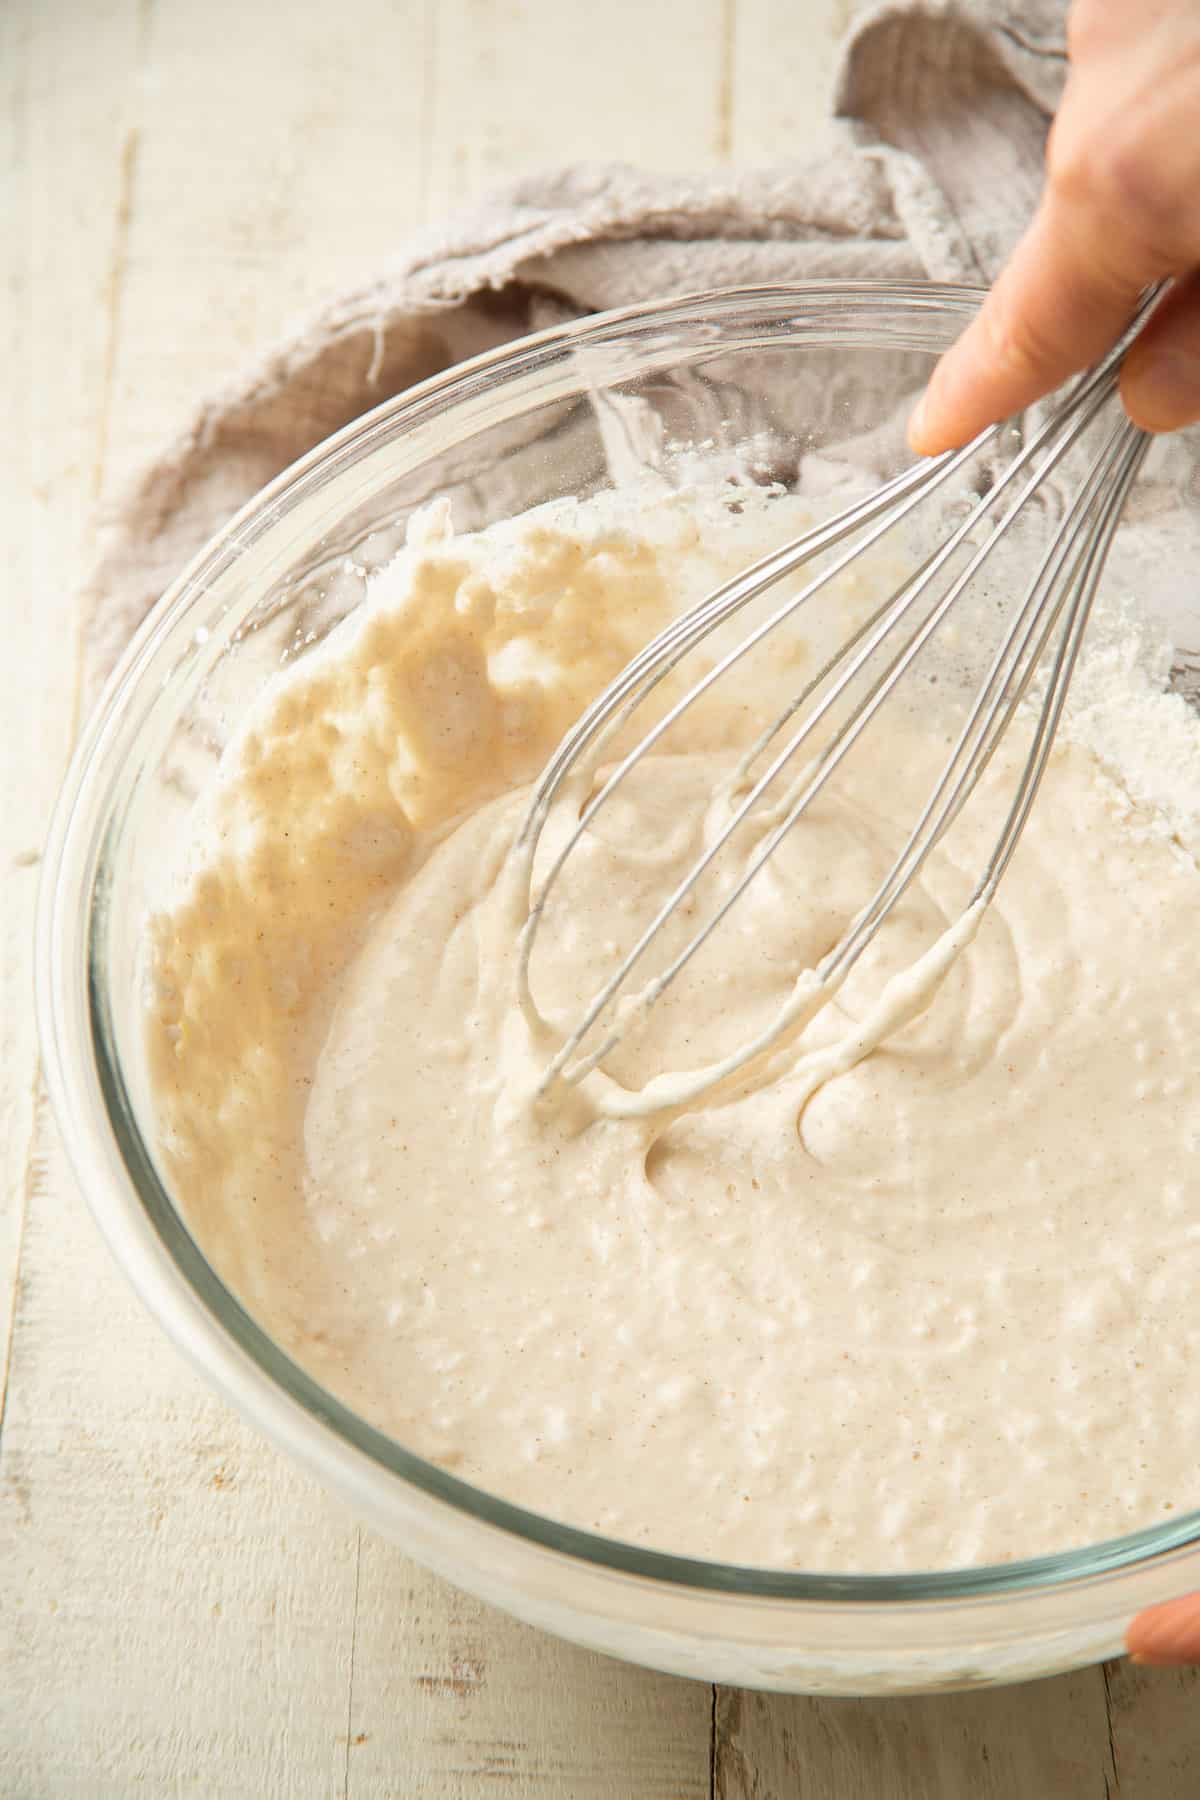 Beat the pancake batter by hand in a bowl.